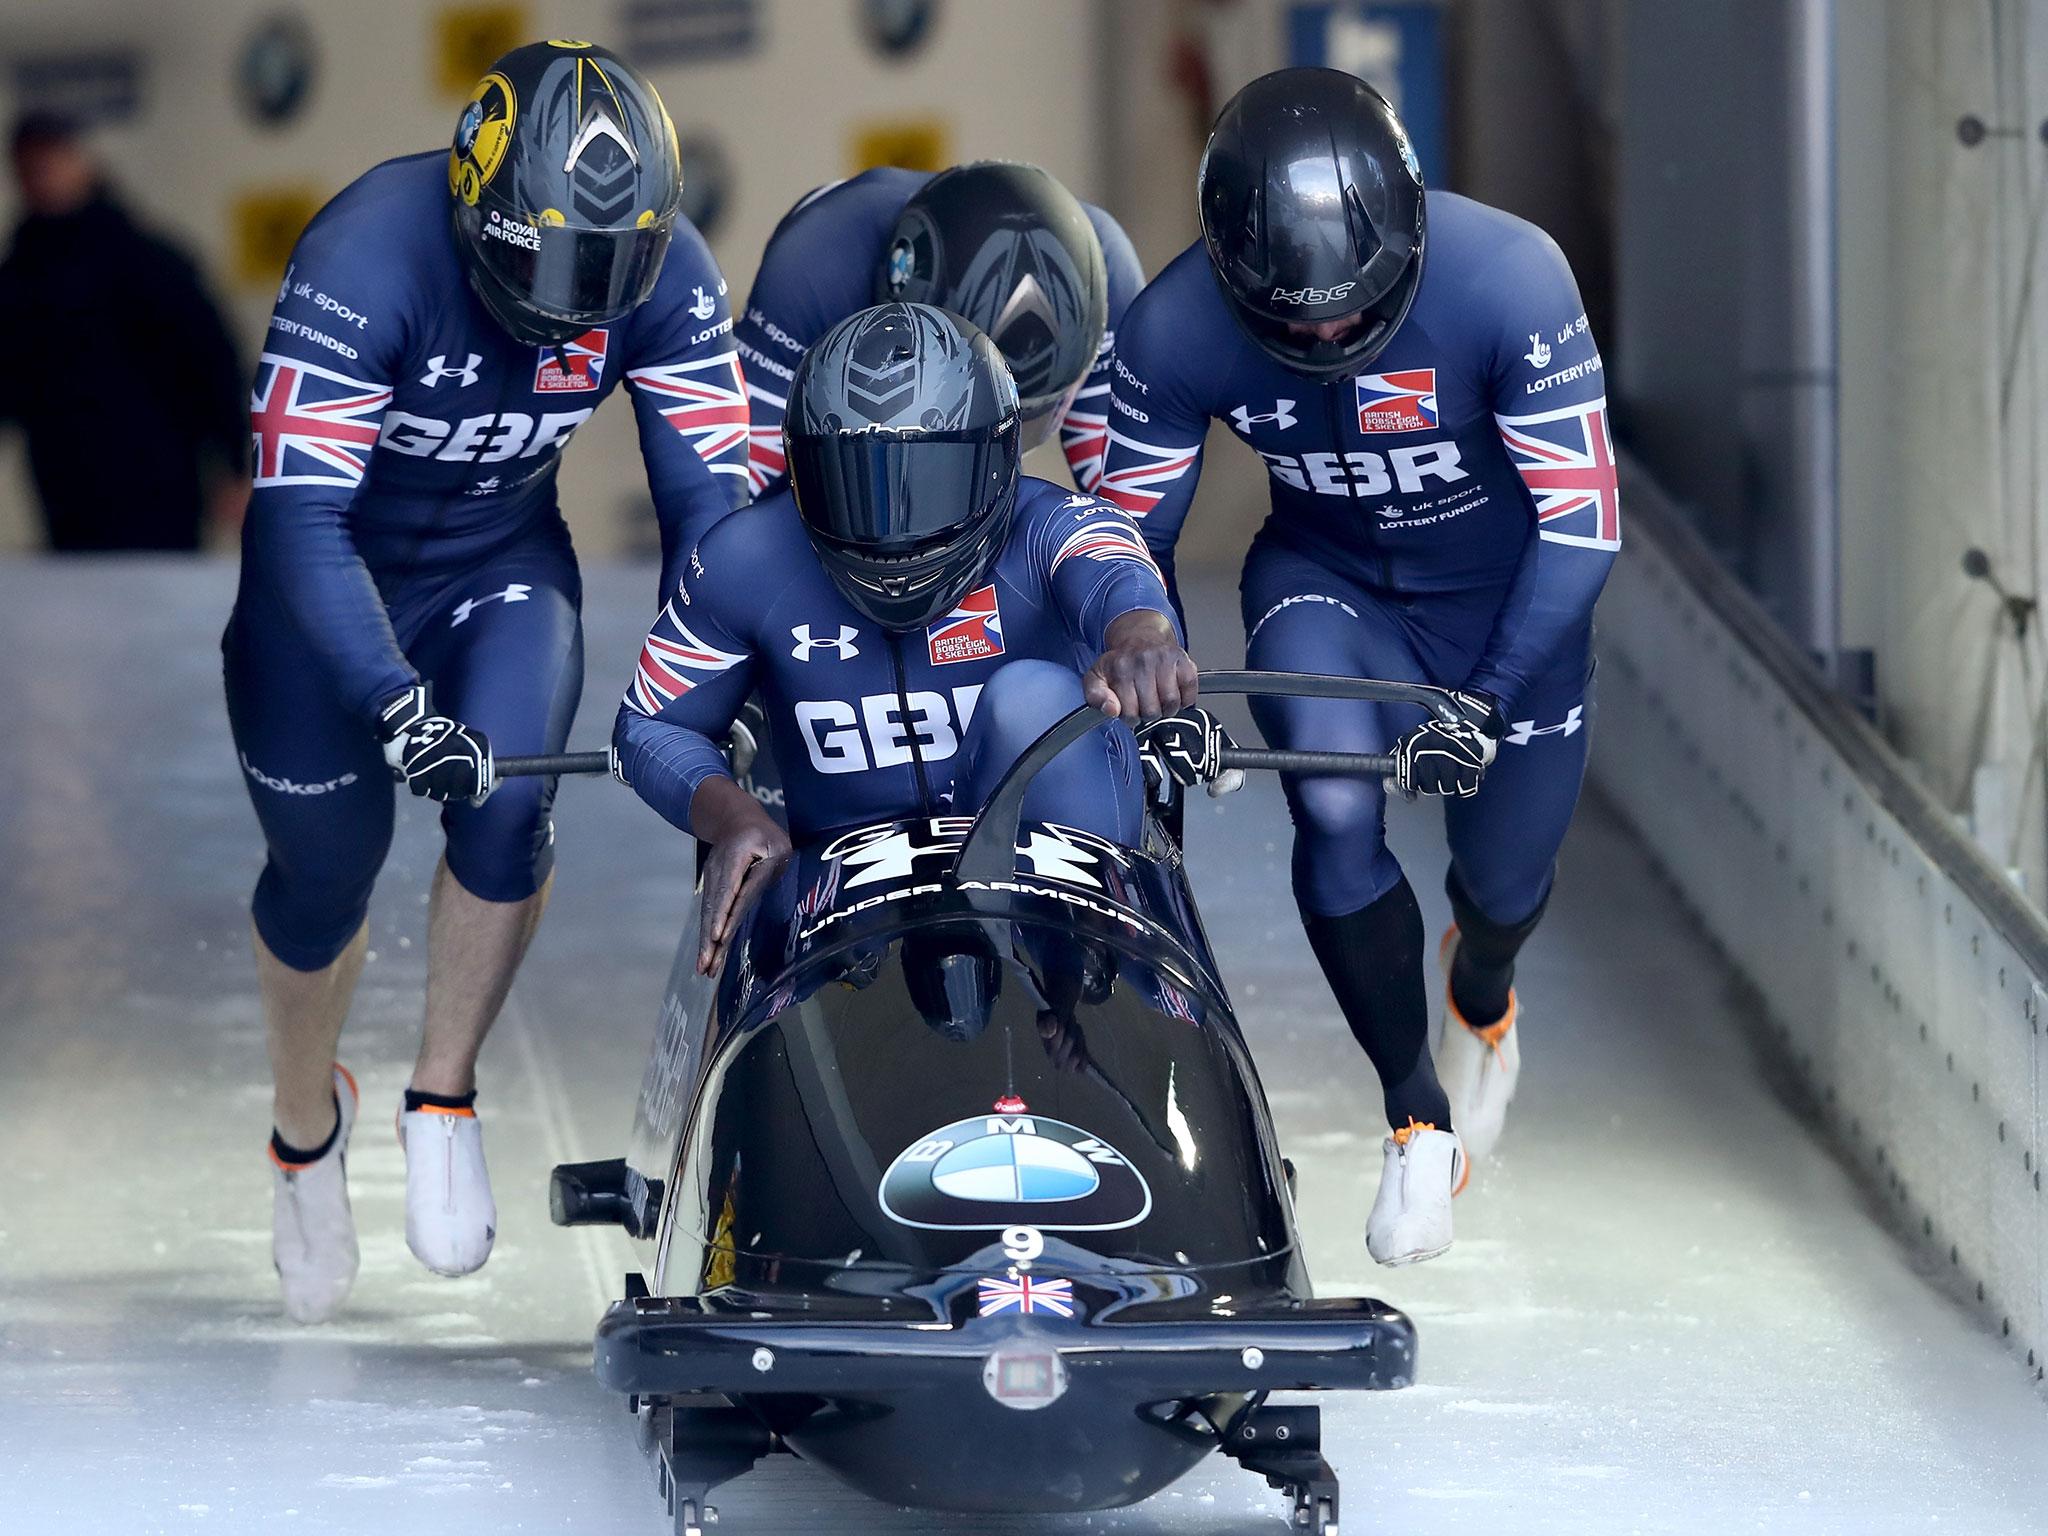 British Bobsleigh is the latest sport in the UK facing controversy